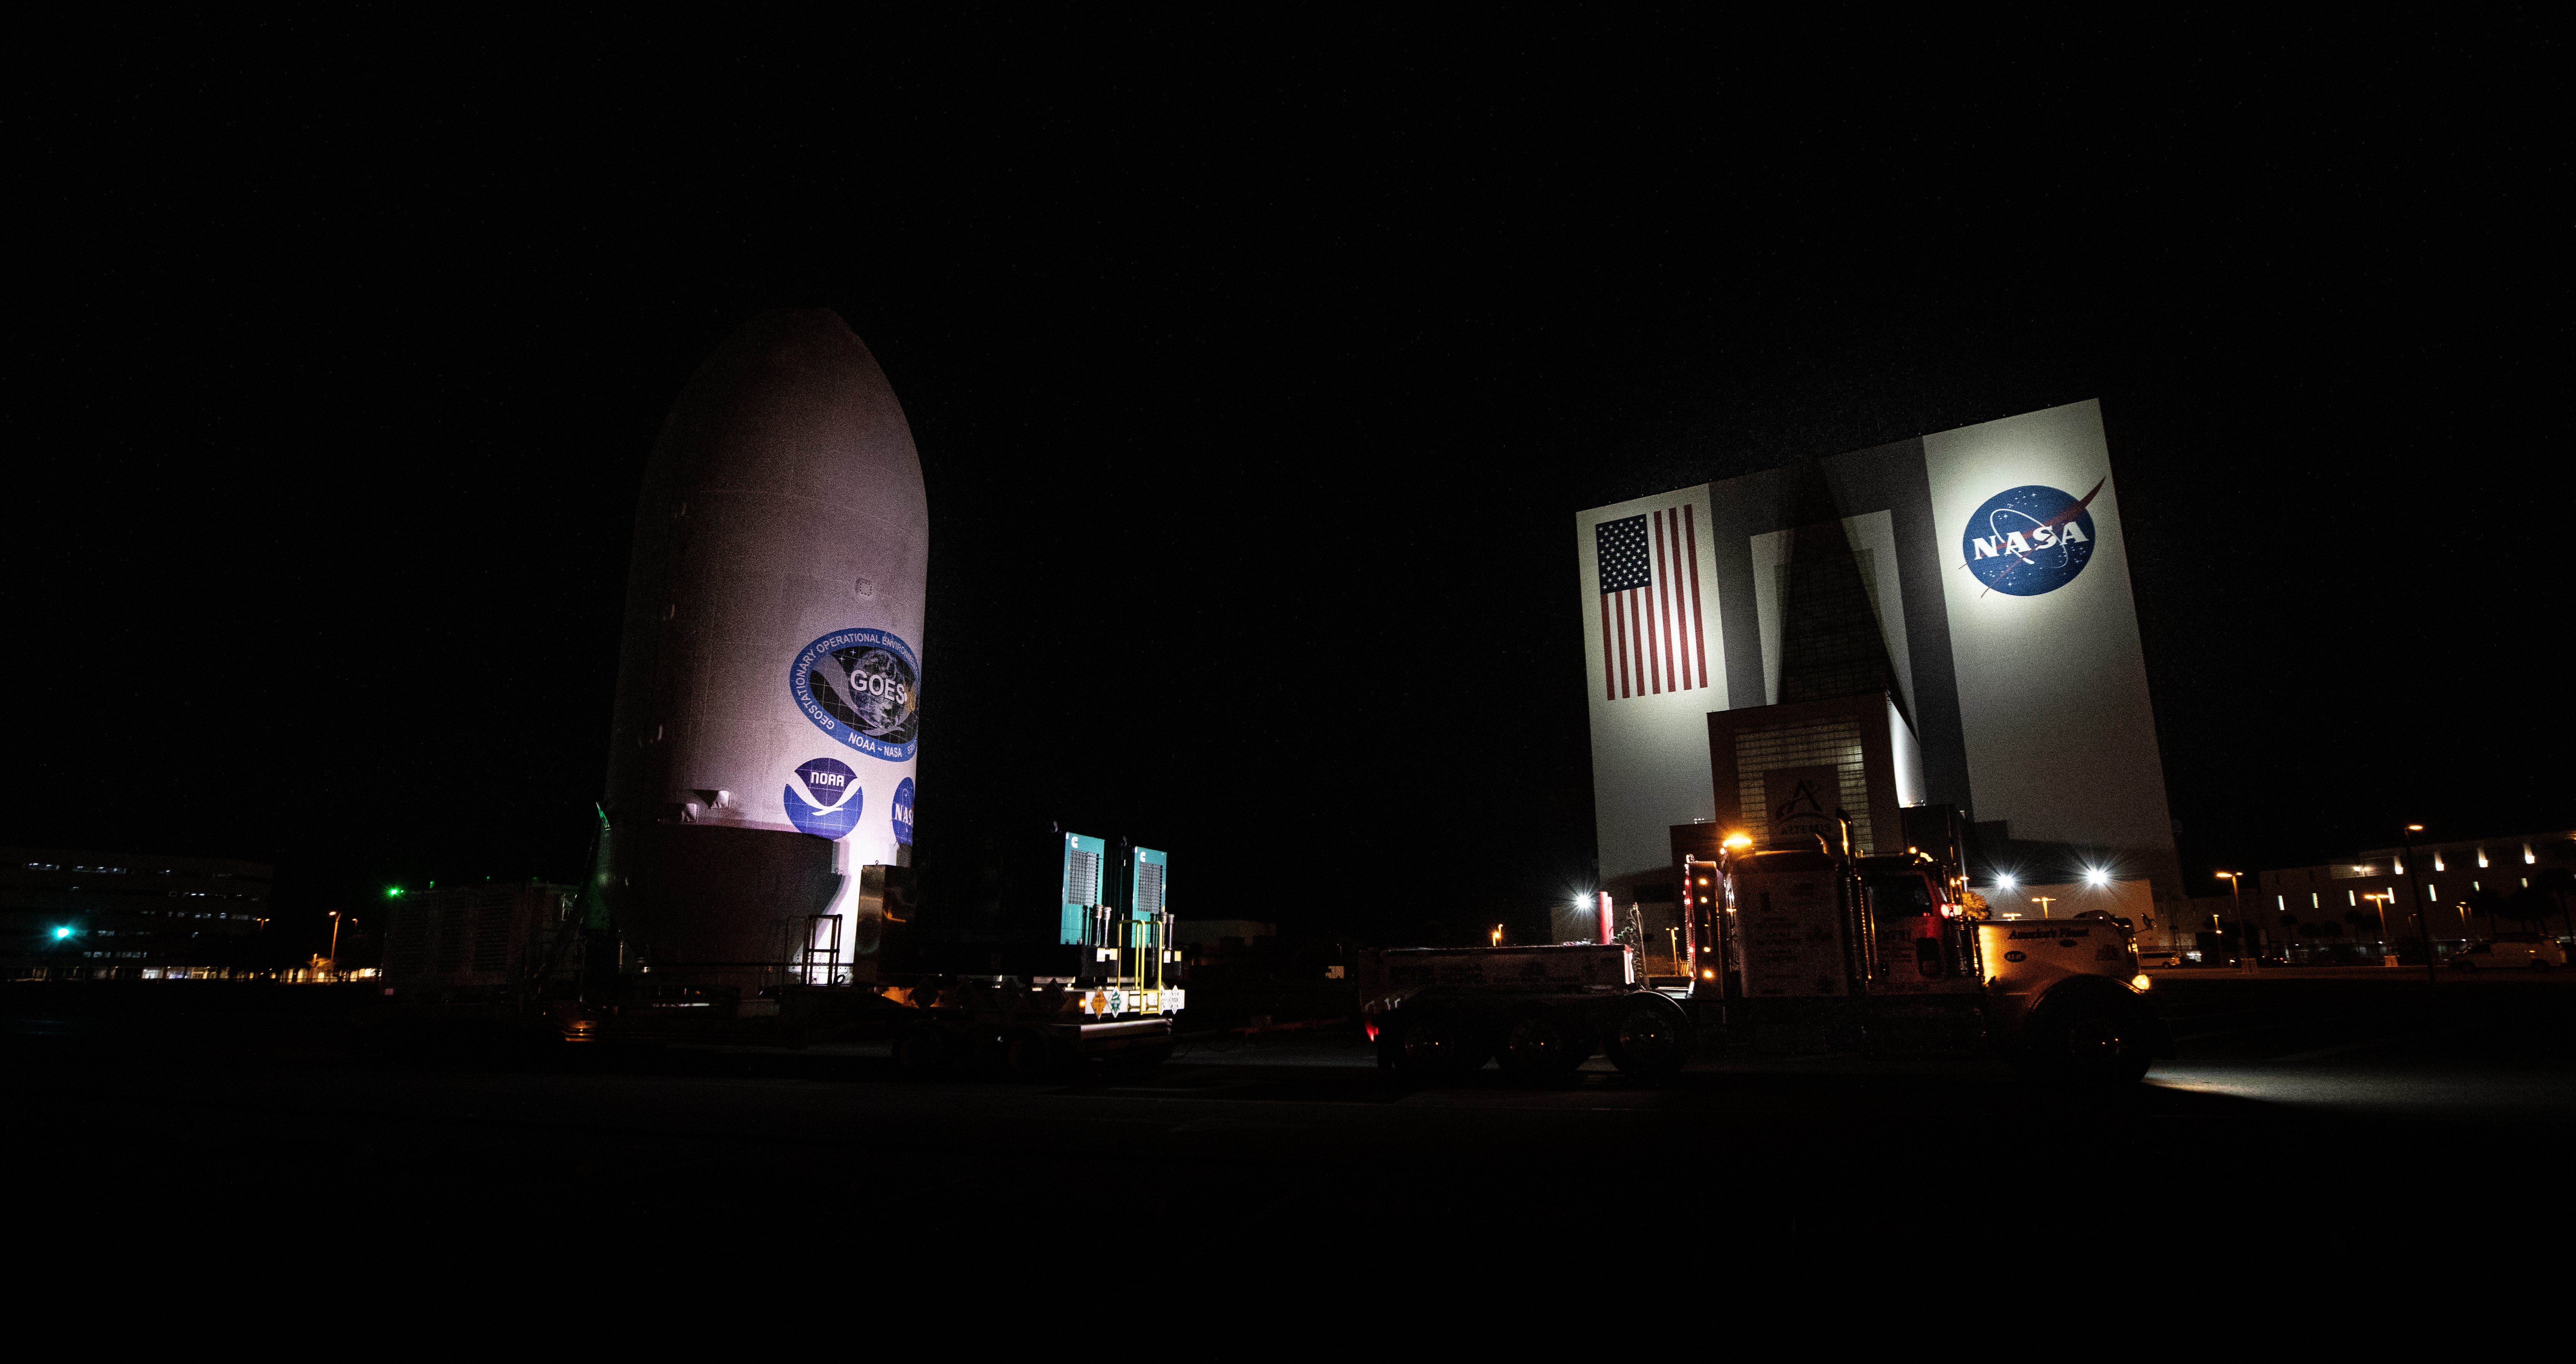 NOAA's GOES-U satellite (left) and NASA's Vehicle Assembly Building (right) are both lit up at night. GOES-U is a white cylindrical object and the VAB is a tall, square building.